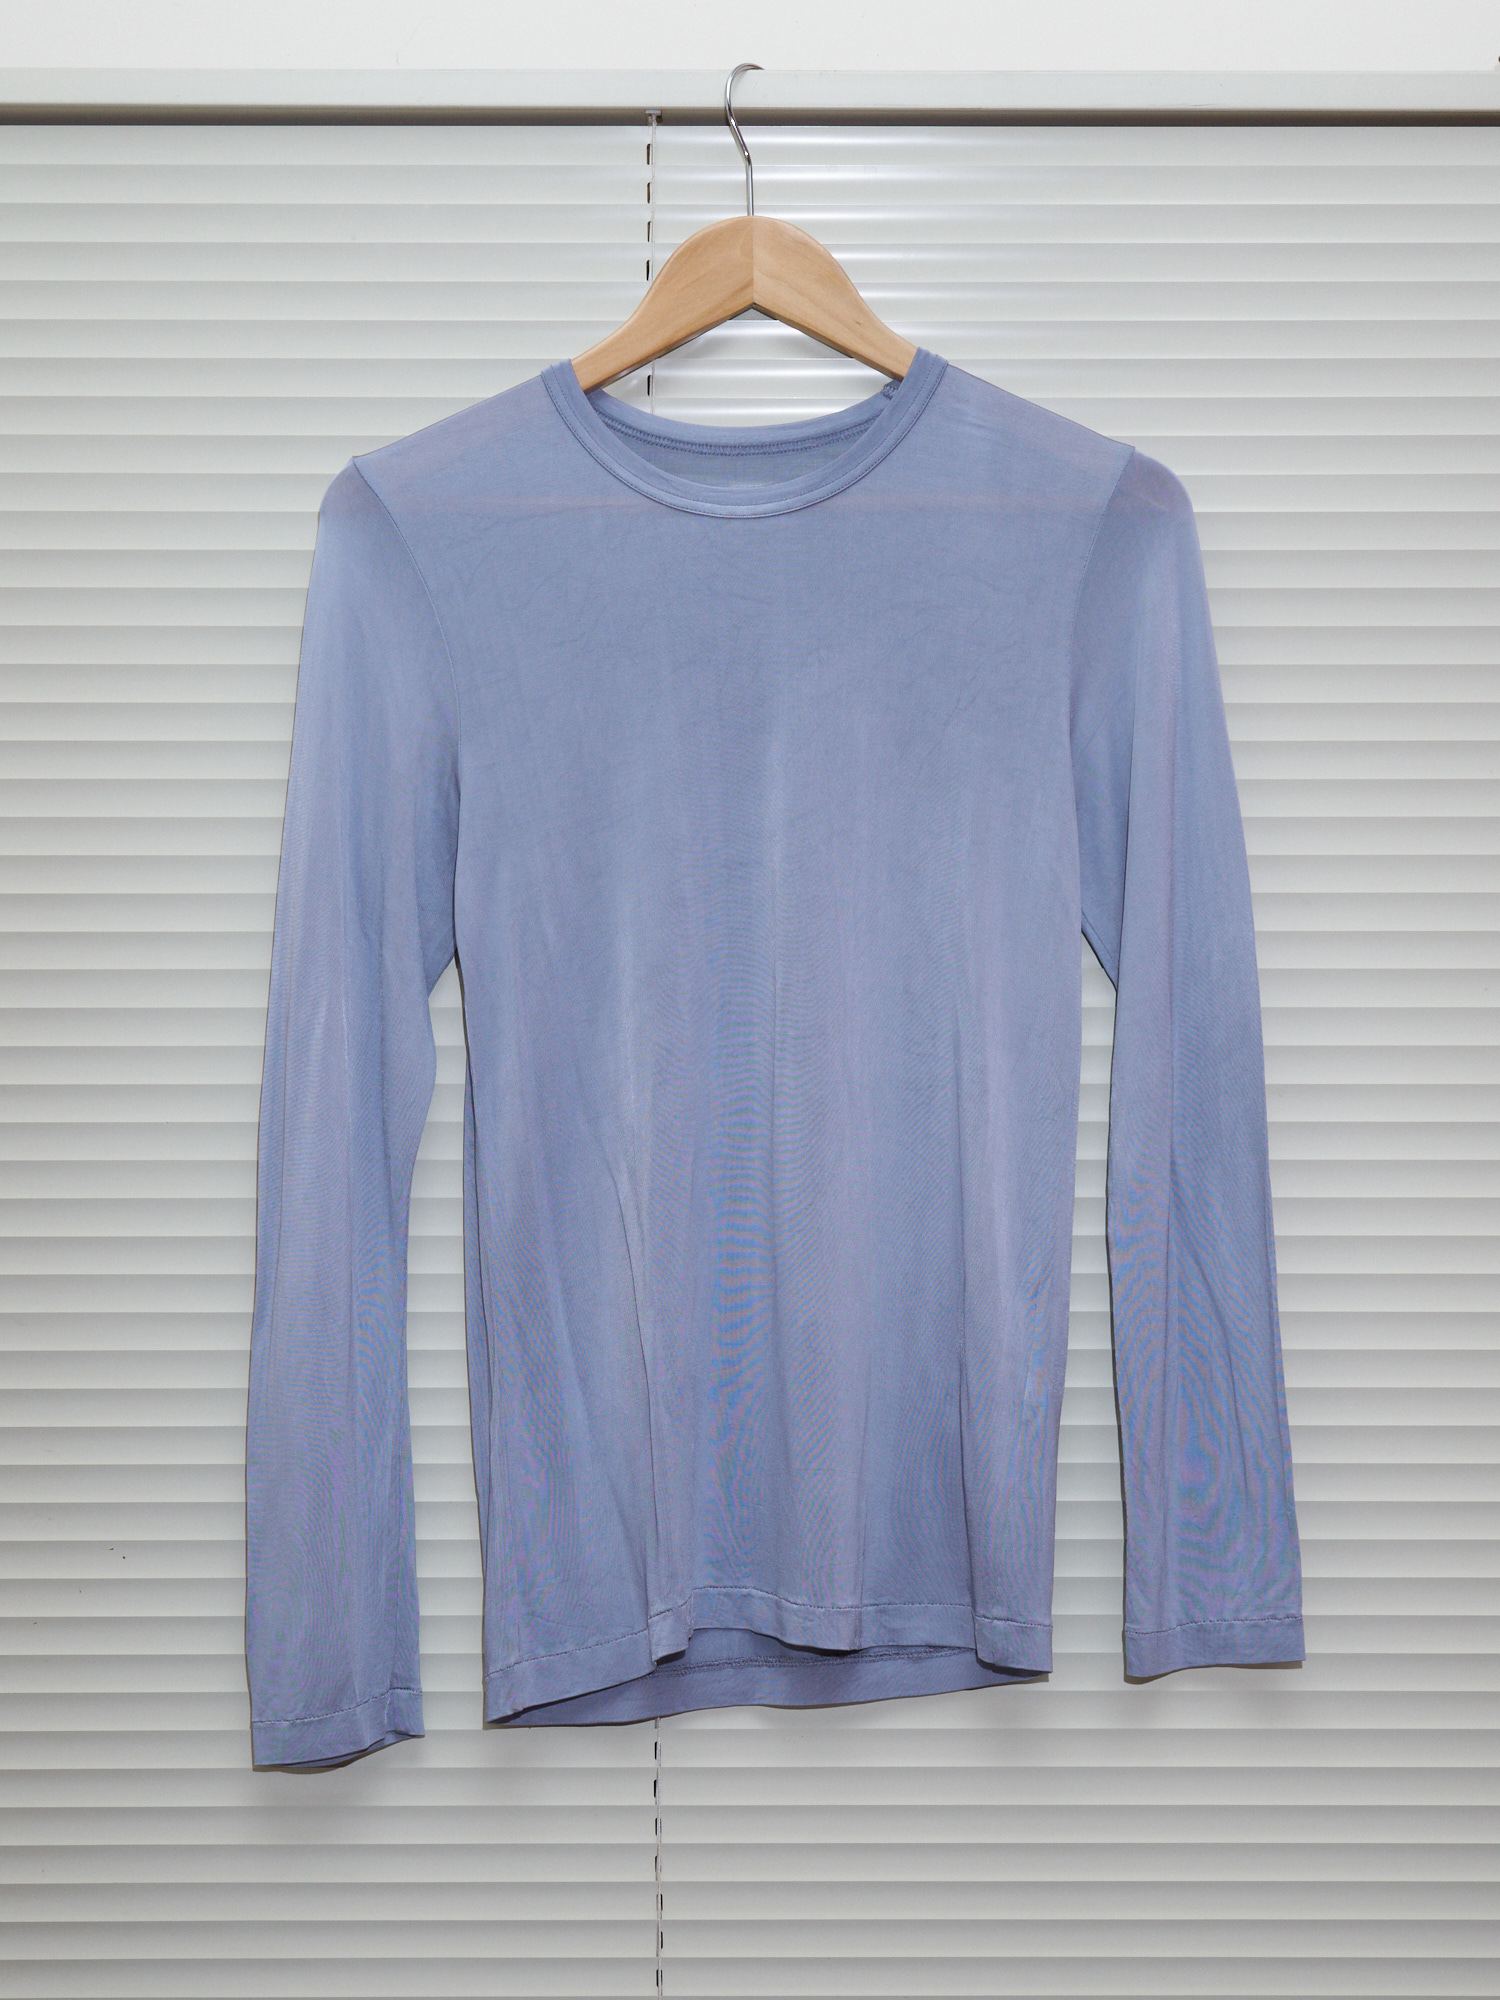 Tricot Comme des Garcons 1994 lavender rayon long sleeve top - womens S